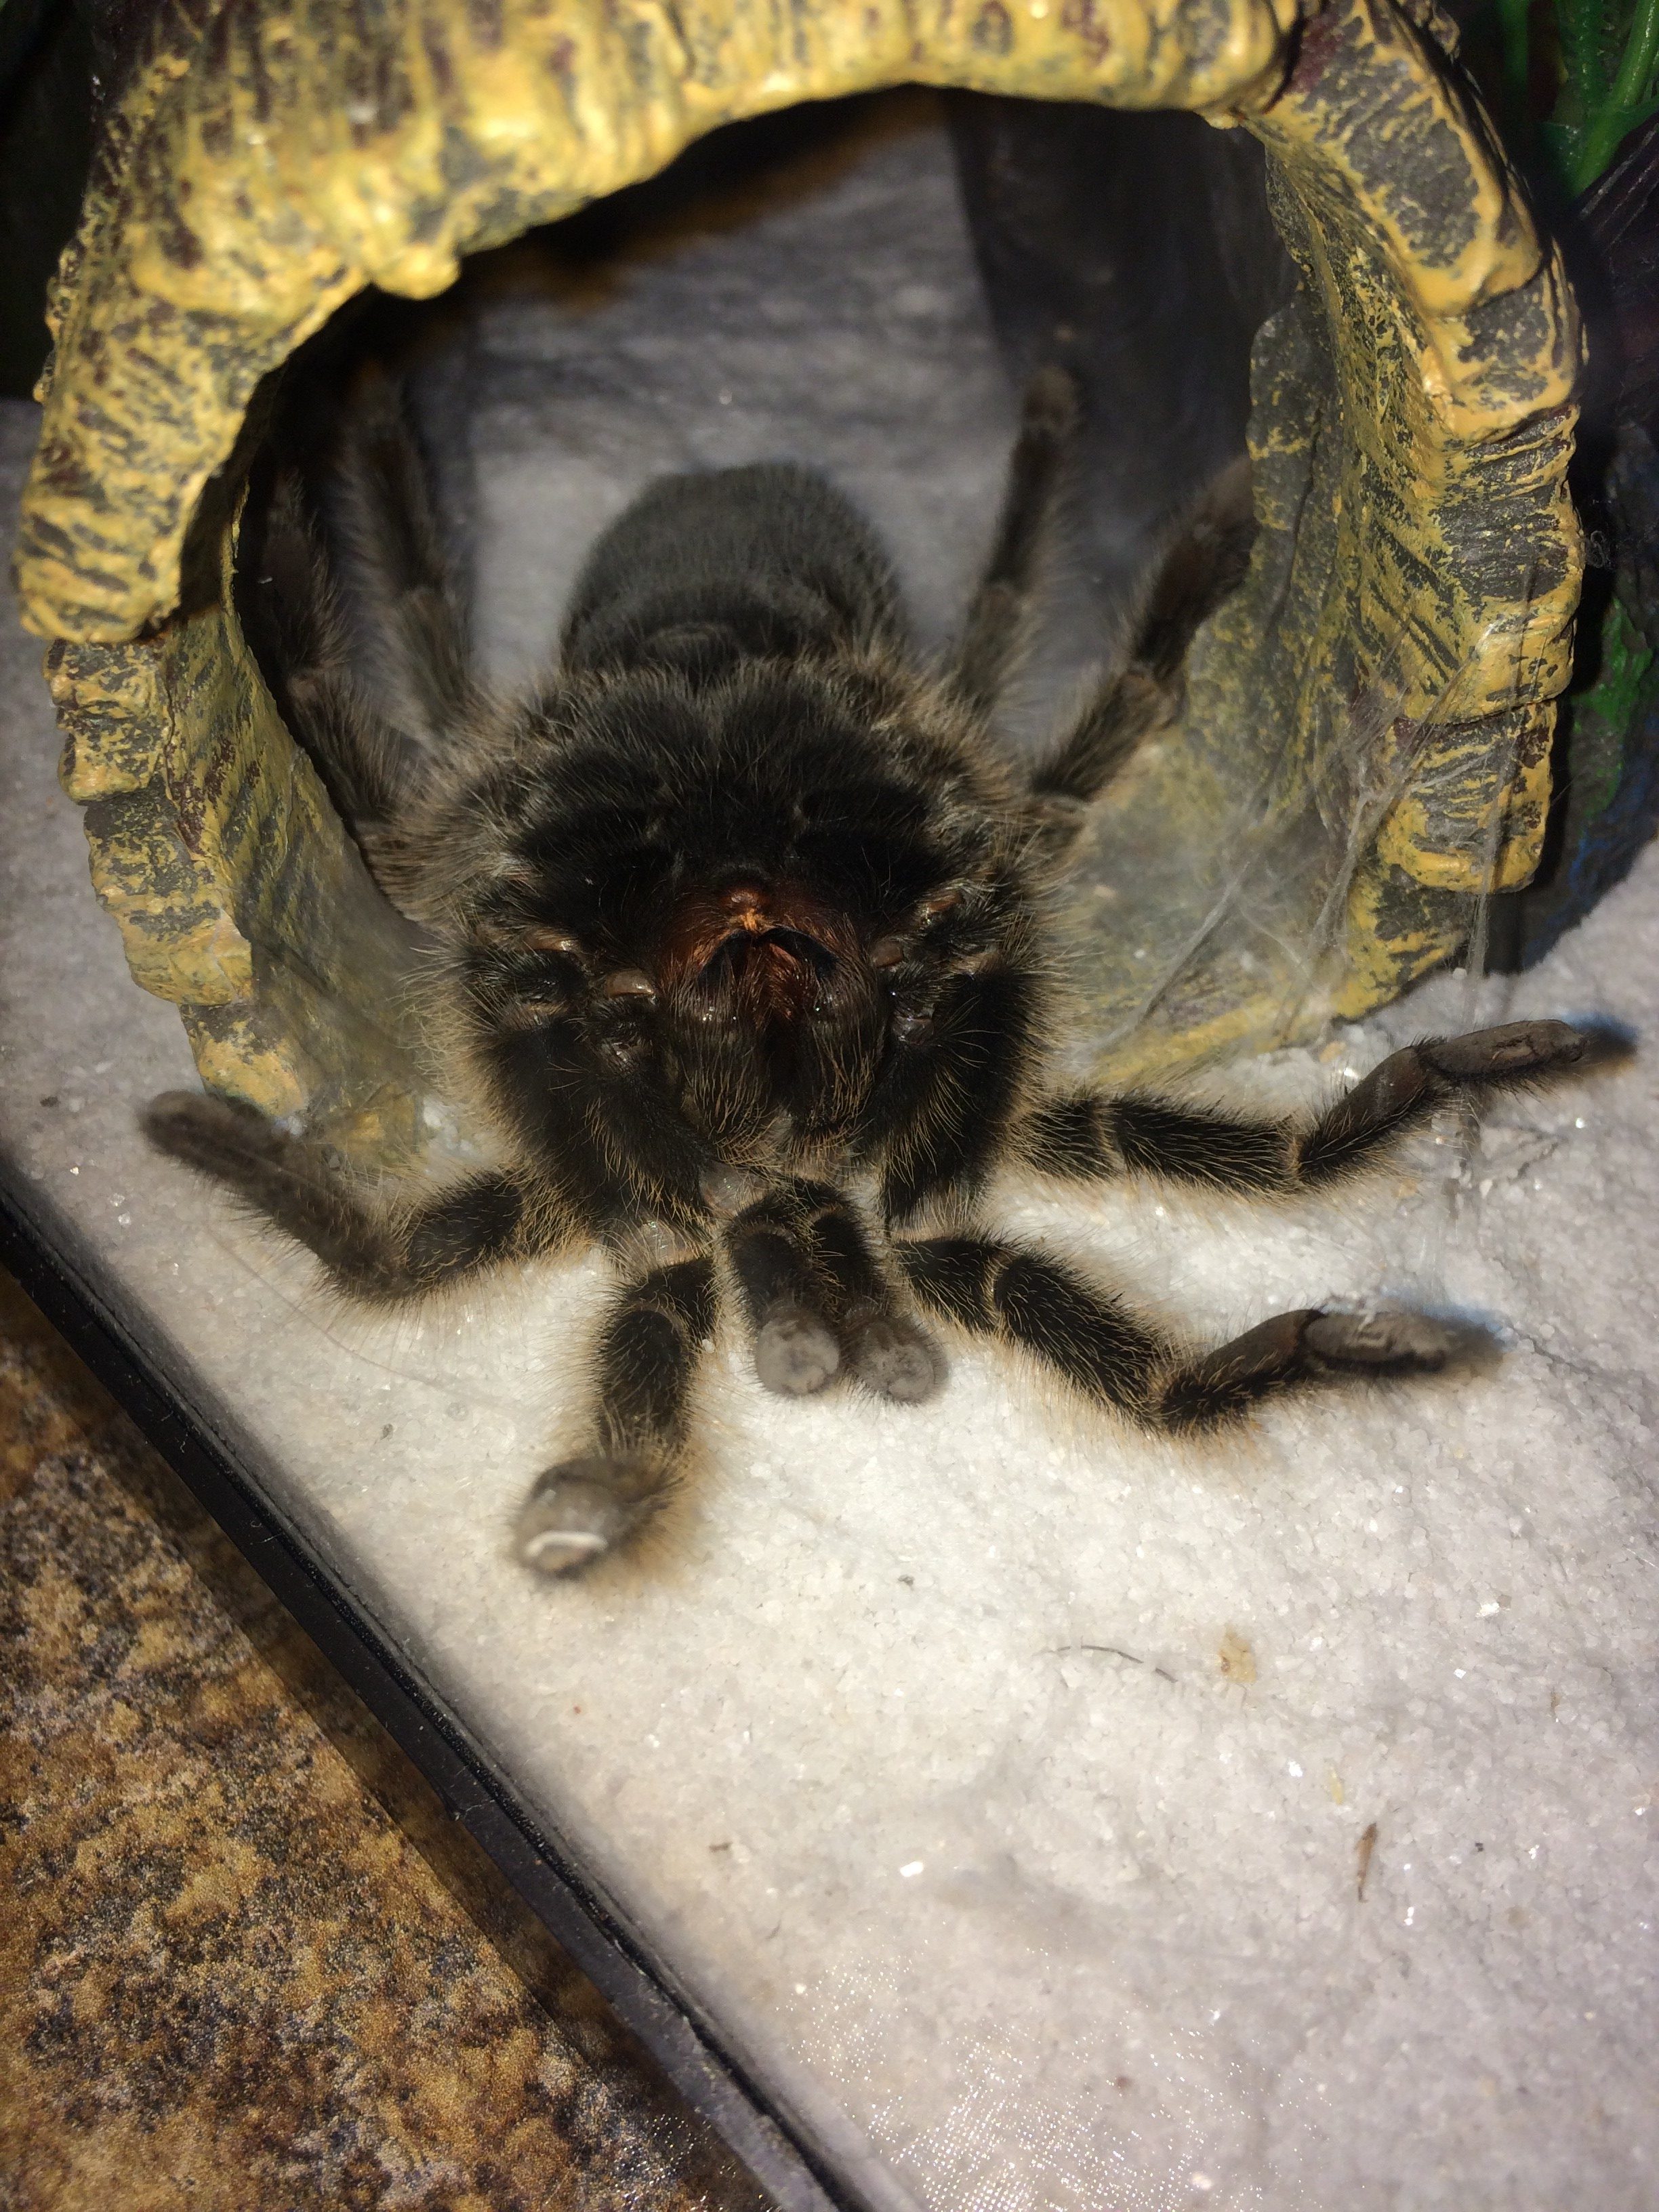 What Happens During Molting?